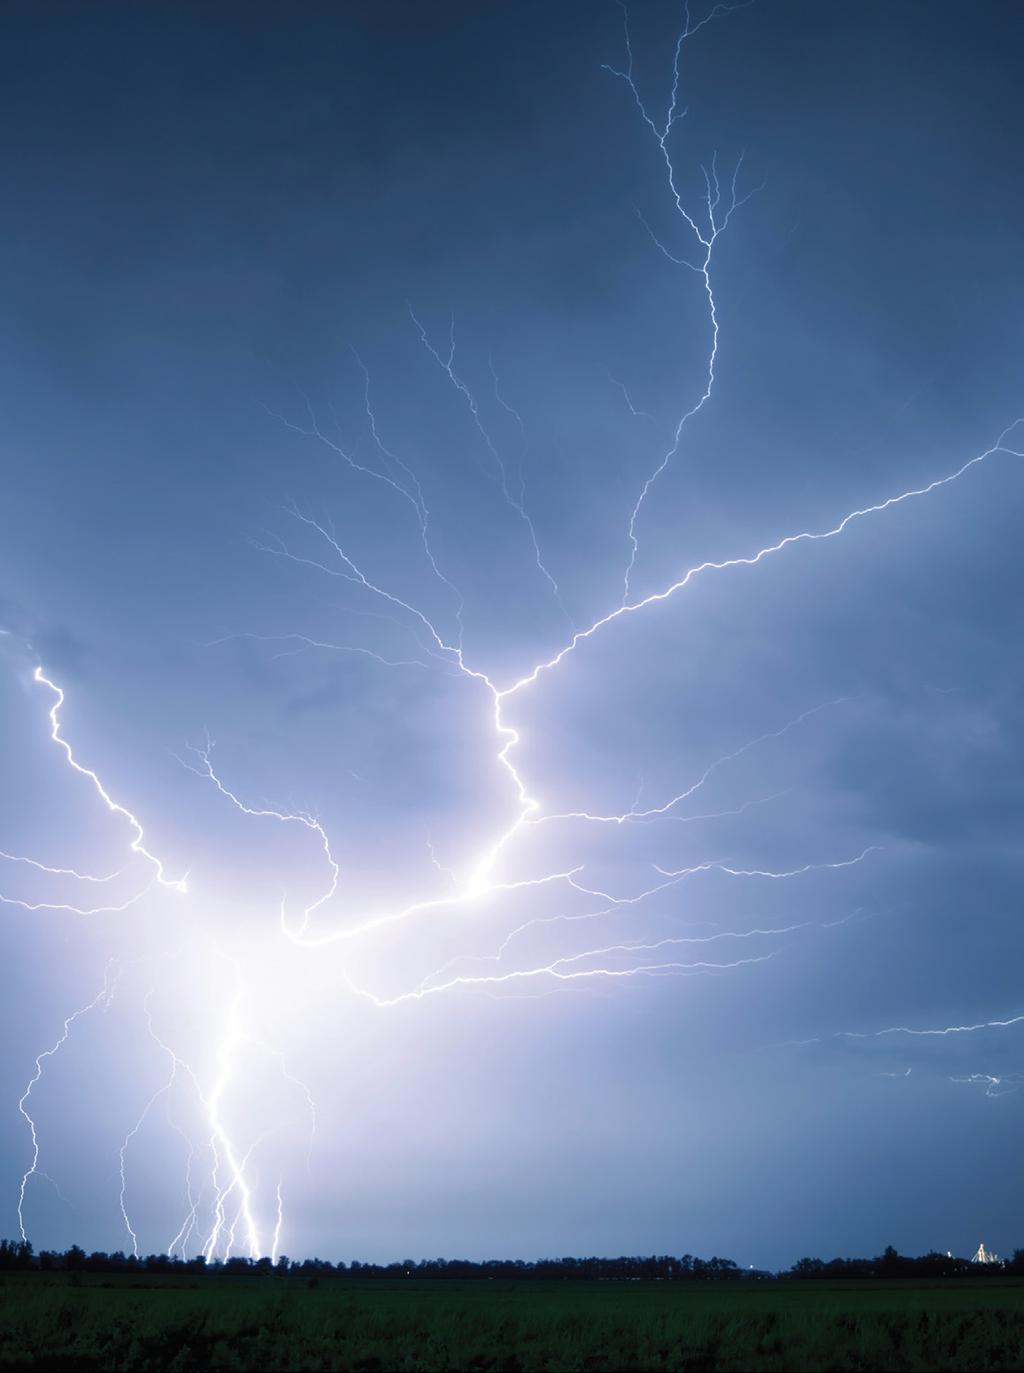 SUMMER STORMS SUMMER STORMS CAN BRING HEAVY RAIN, HIGH WINDS, HAIL, INTENSE LIGHTNING AND EVEN TORNADOES - ALL OF WHICH CAN DAMAGE PROPERTY AND THREATEN LIVES. Tune into local media, RMWB.